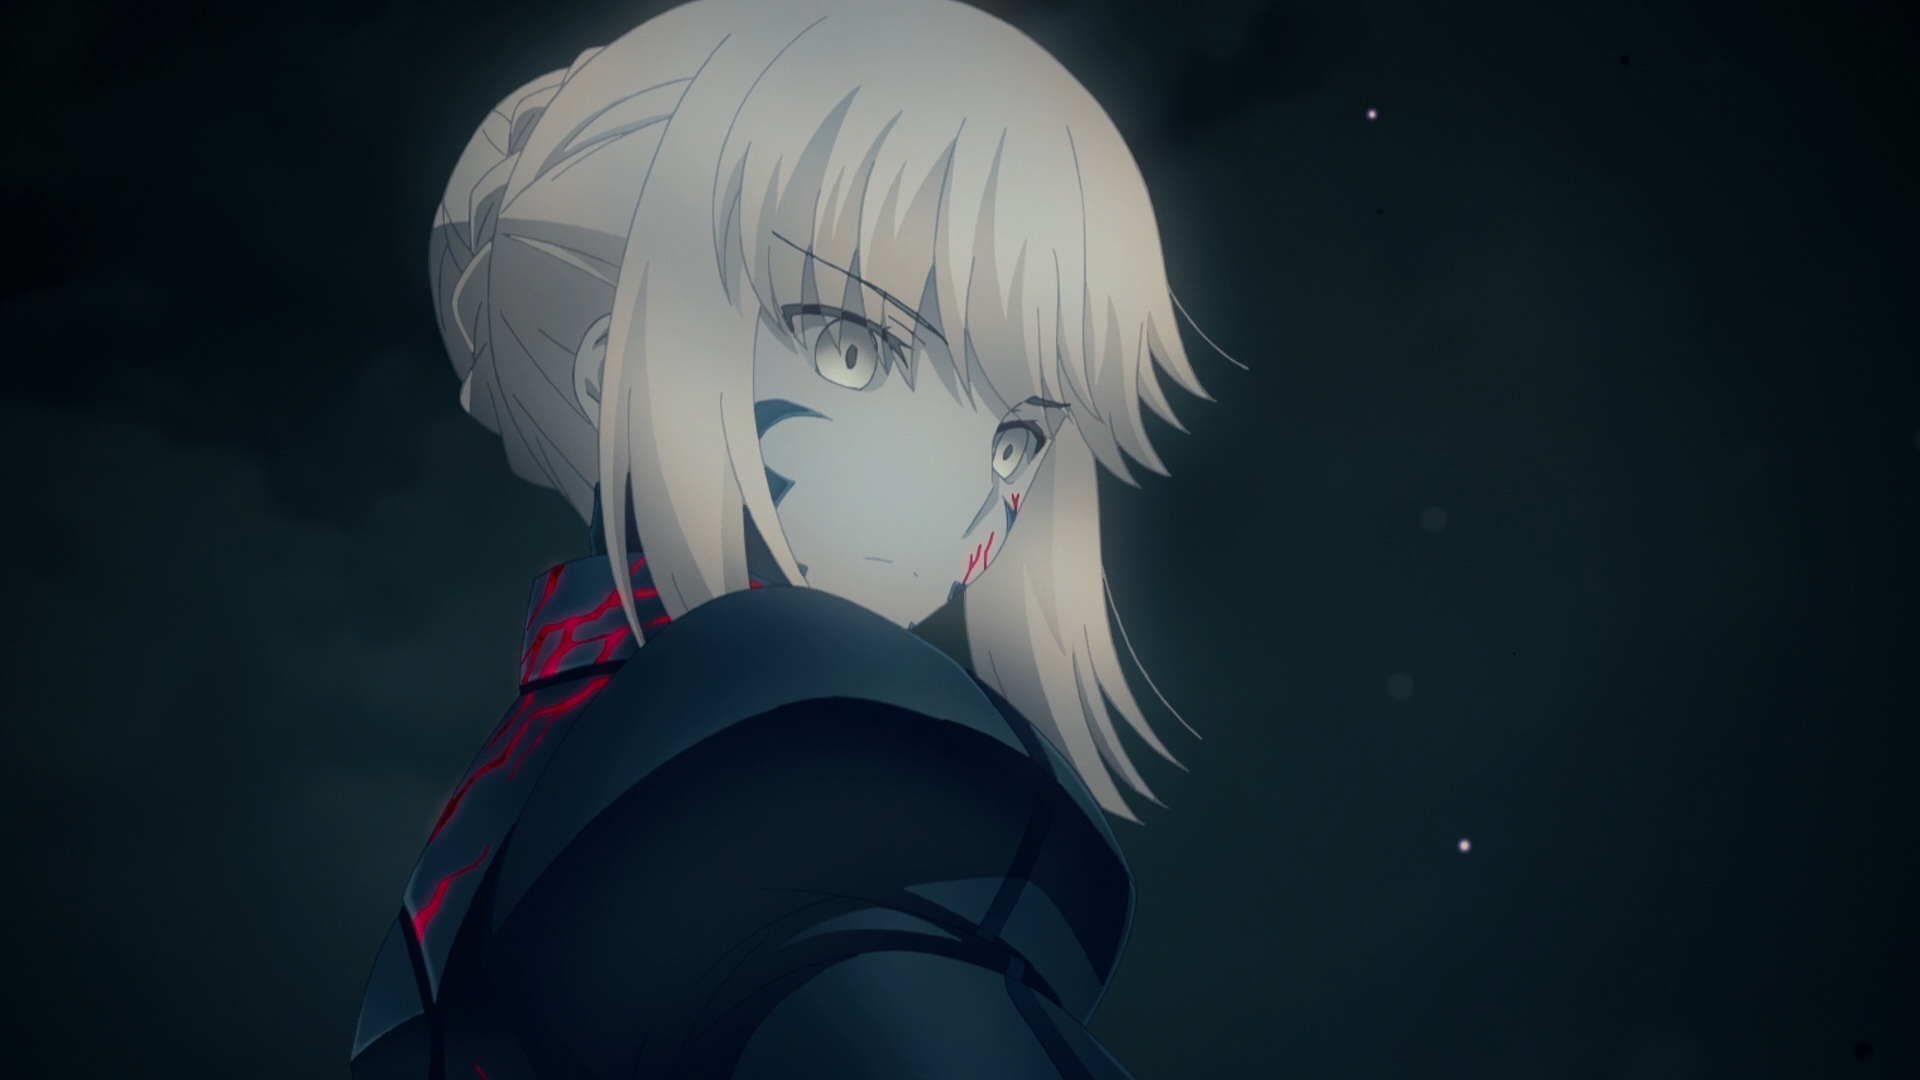 Anime Movie Review — Fate/Stay Night: Heaven's Feel II. Lost